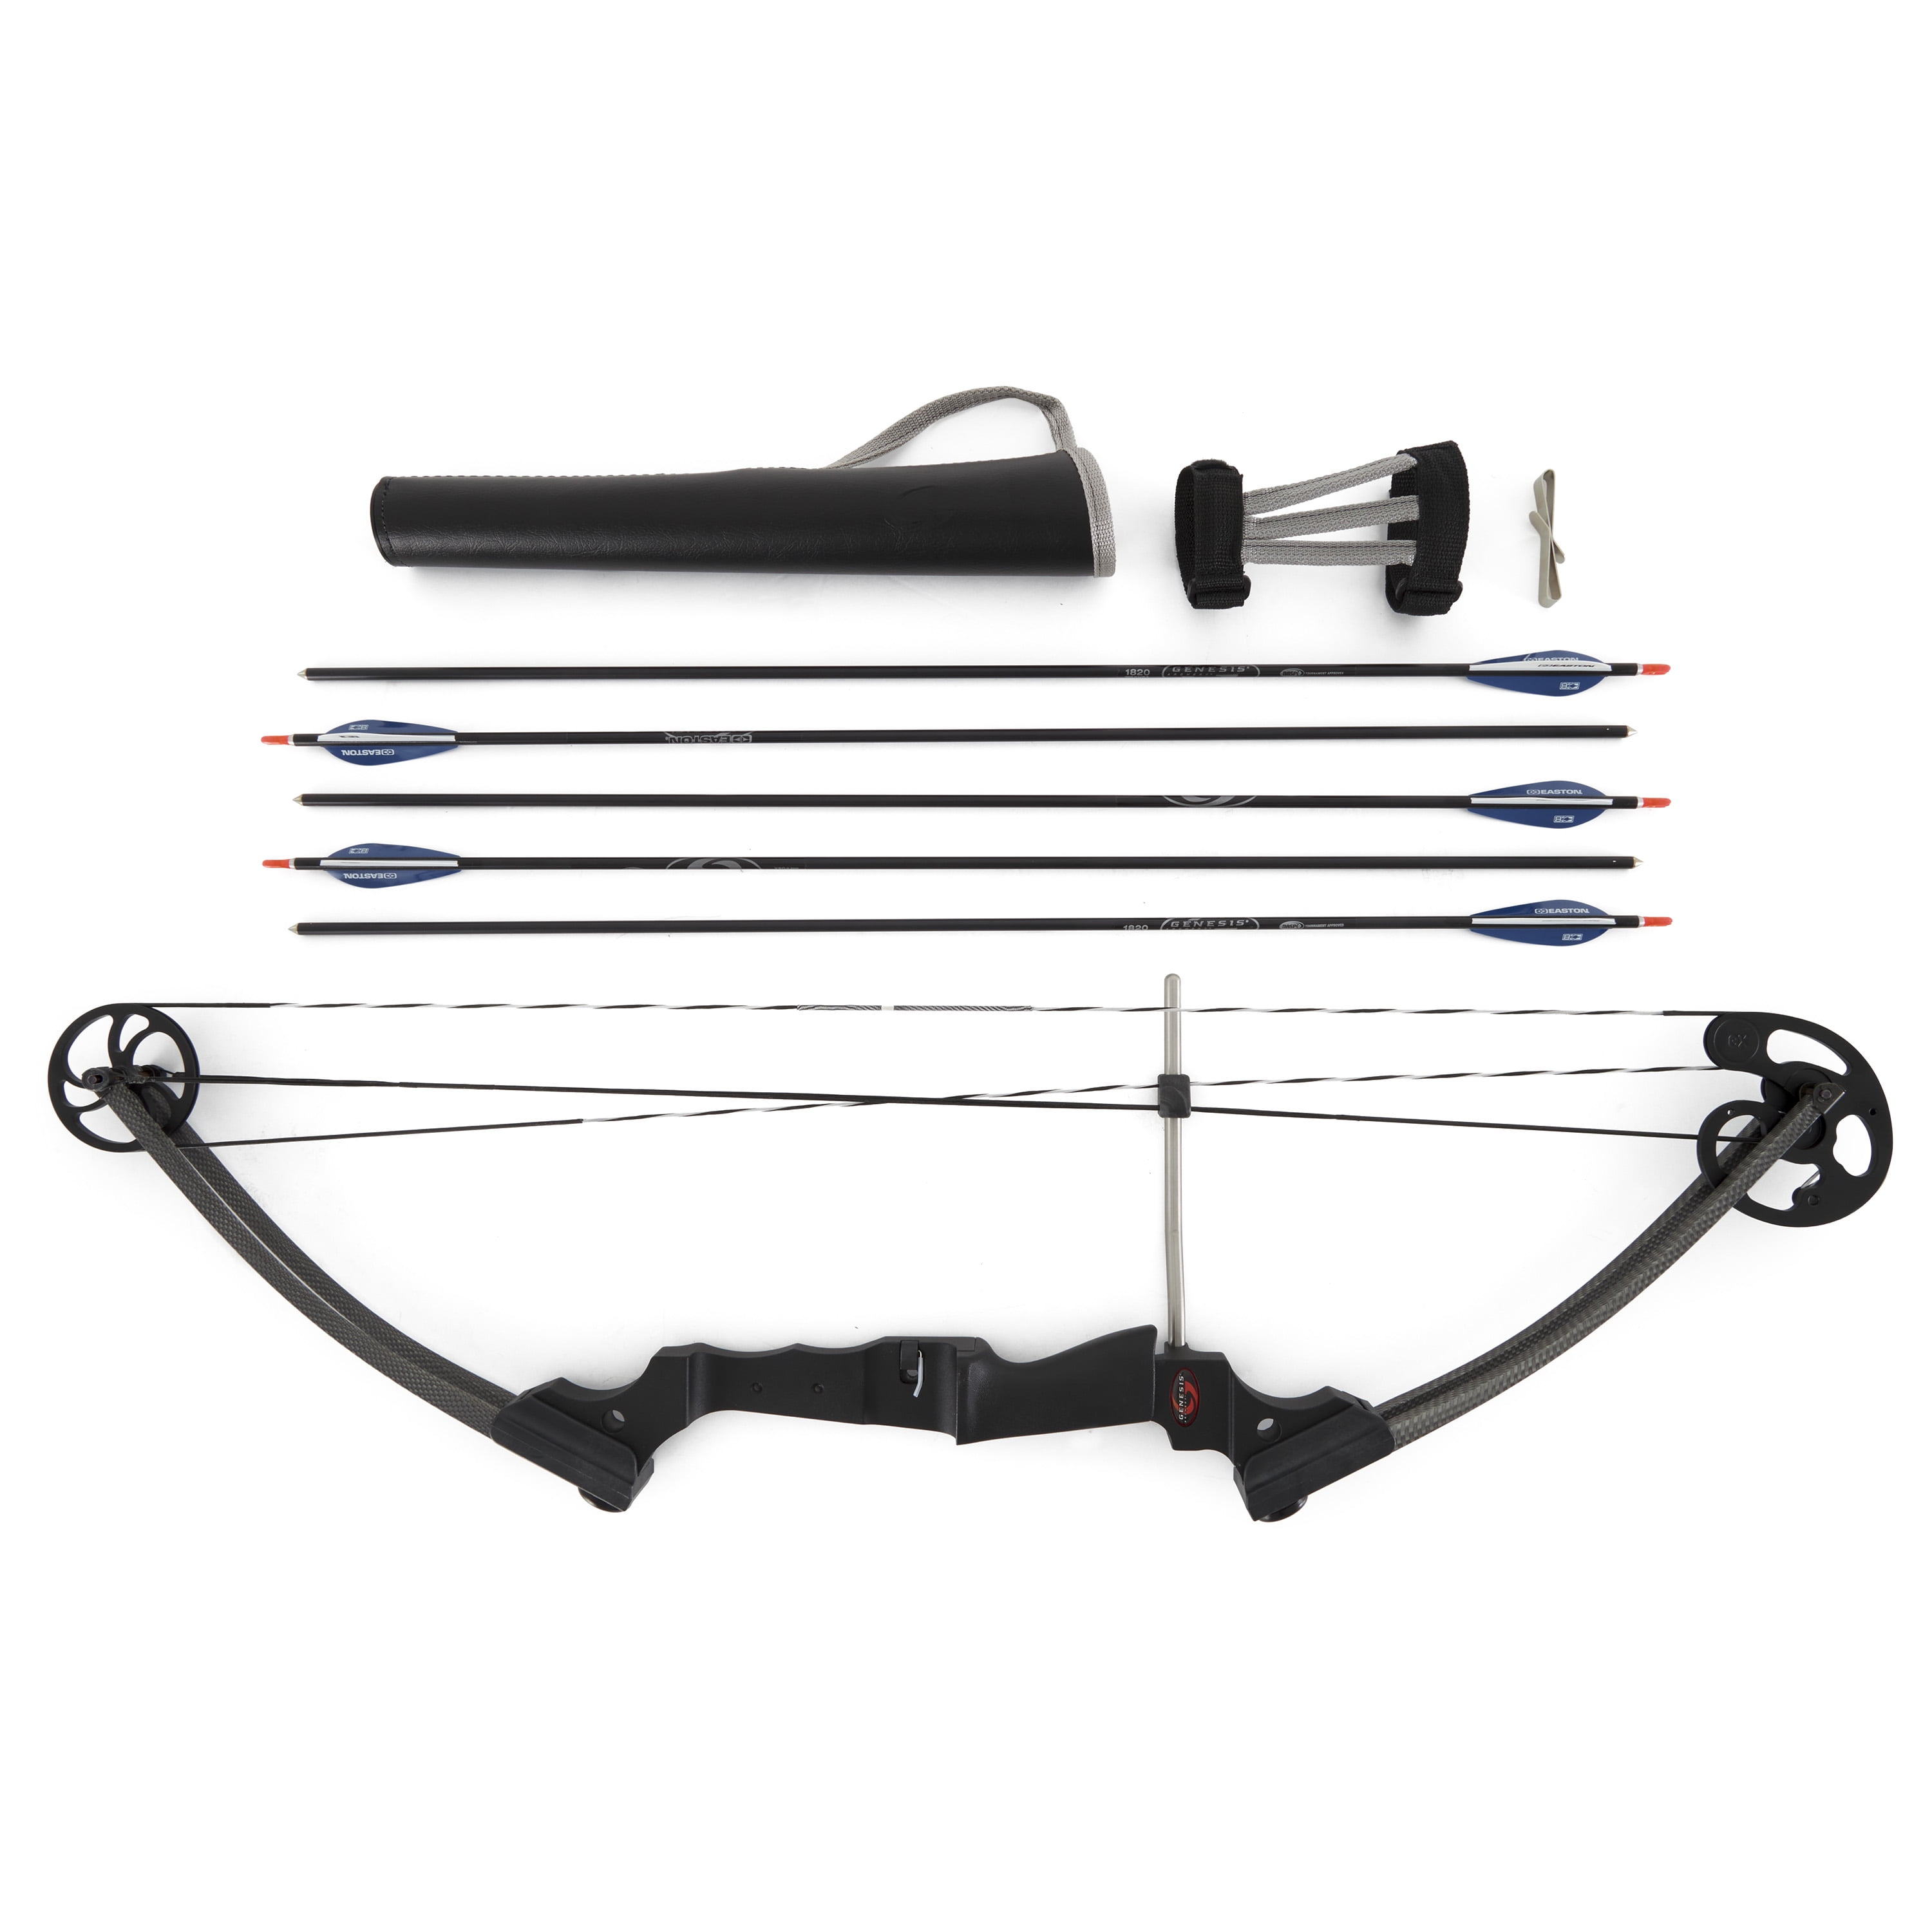 Archery Easy To Use Bow Stringer With Instructions By Petron 